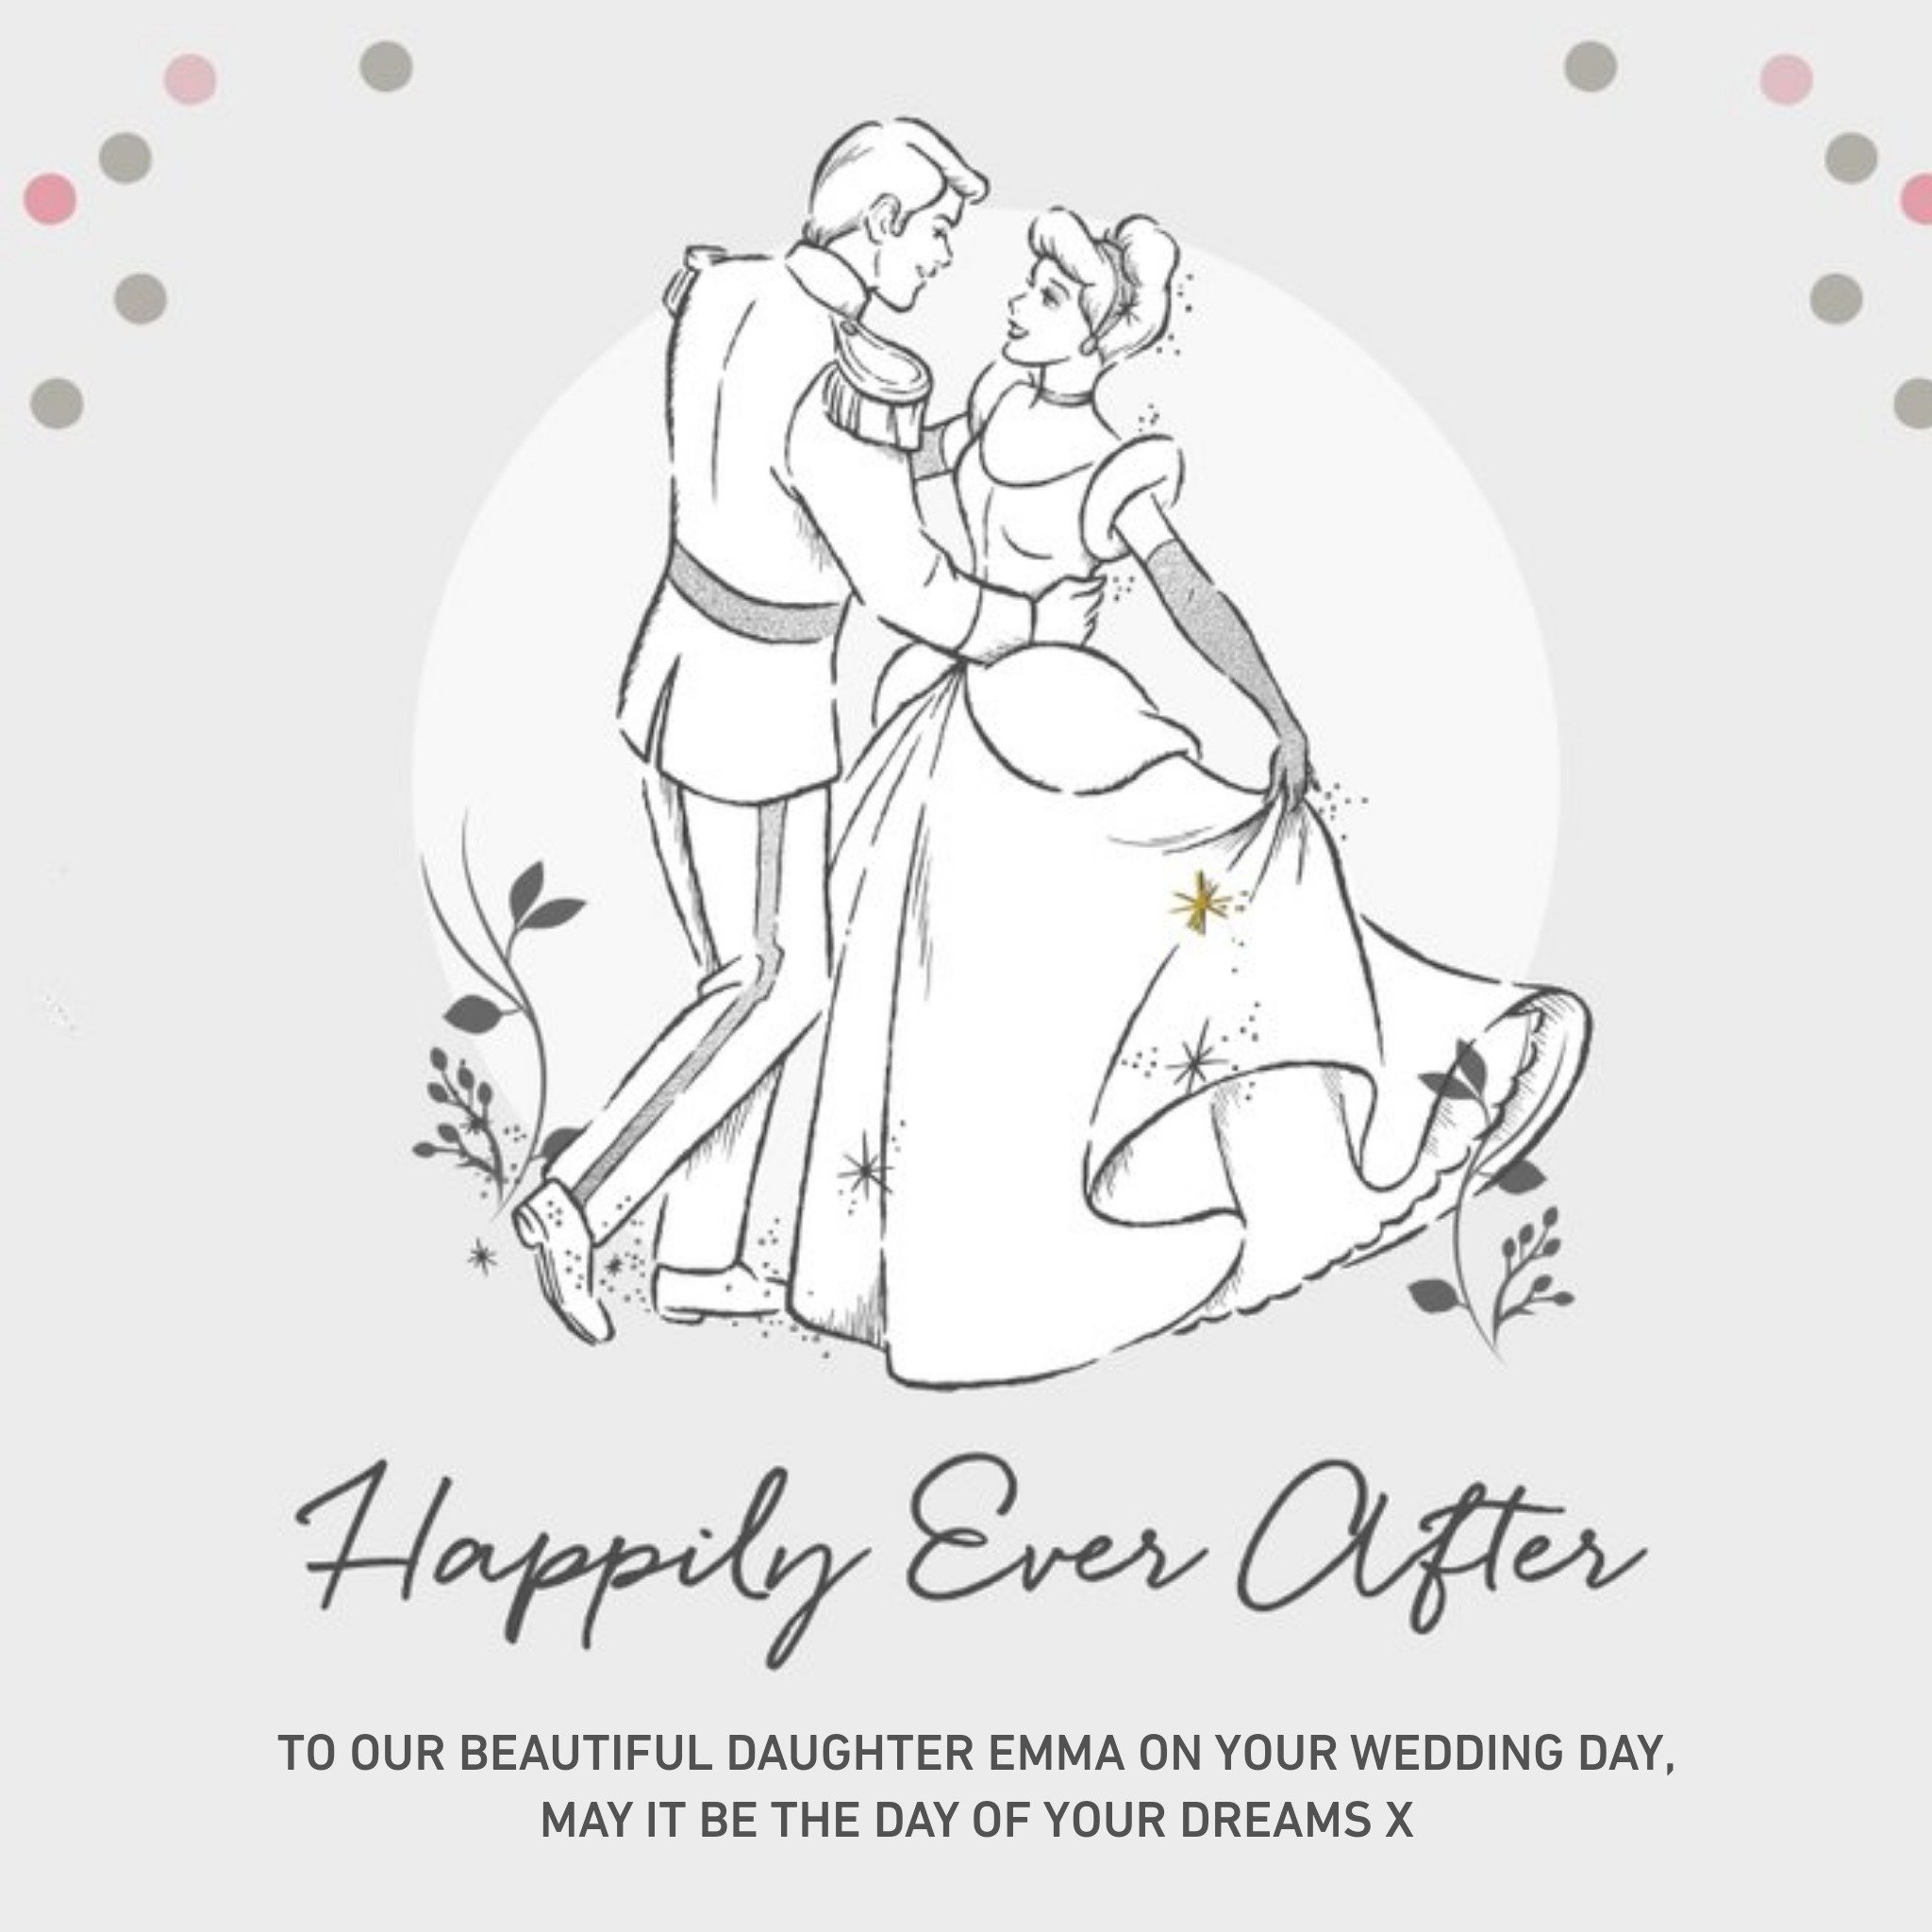 Disney Cinderella And Prince Charming Happily Ever After Wedding Card For Daughter, Large